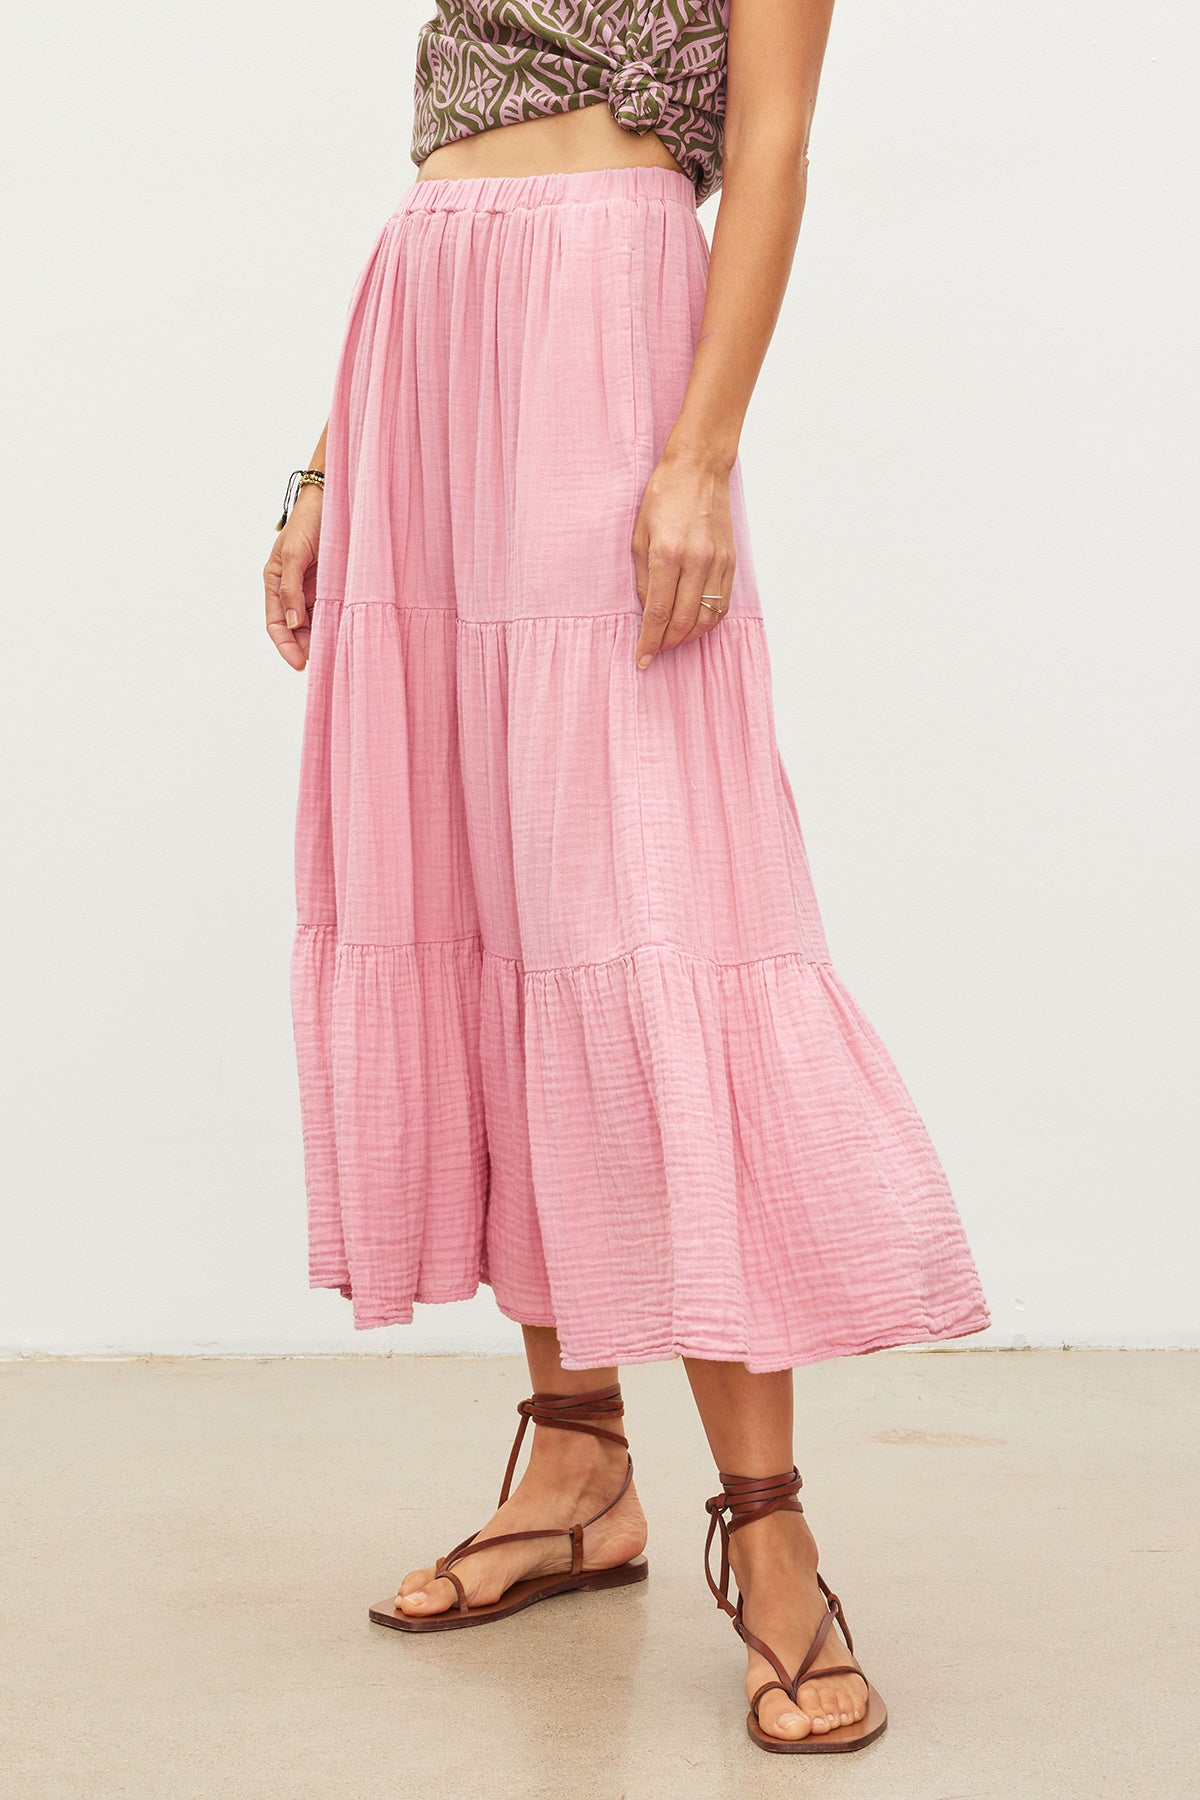 An essential woman's outfit featuring a pink ruffled DANIELLE COTTON GAUZE TIERED SKIRT made by Velvet by Graham & Spencer and paired with comfortable sandals.-35955694174401